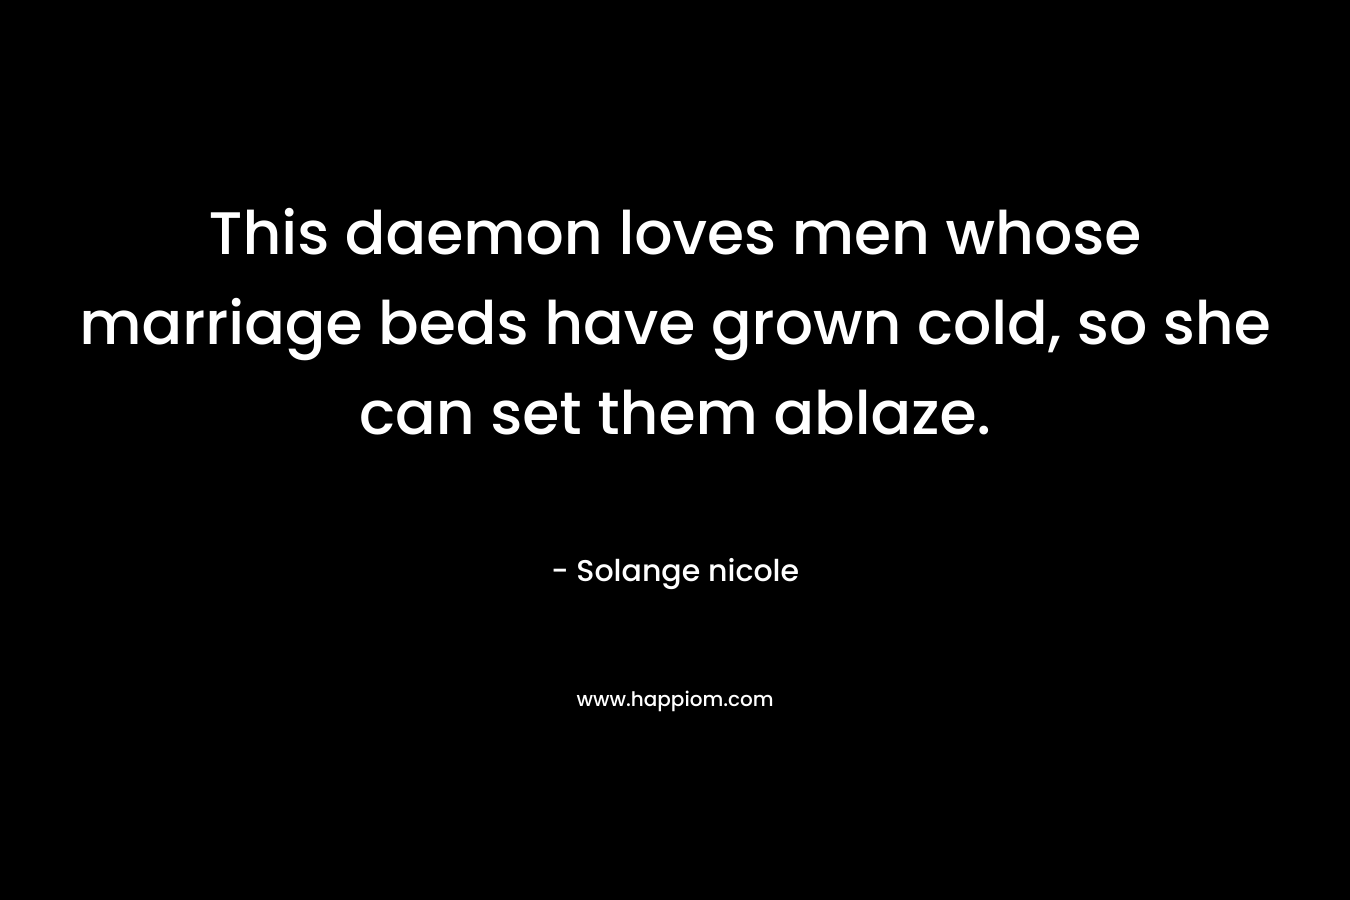 This daemon loves men whose marriage beds have grown cold, so she can set them ablaze.